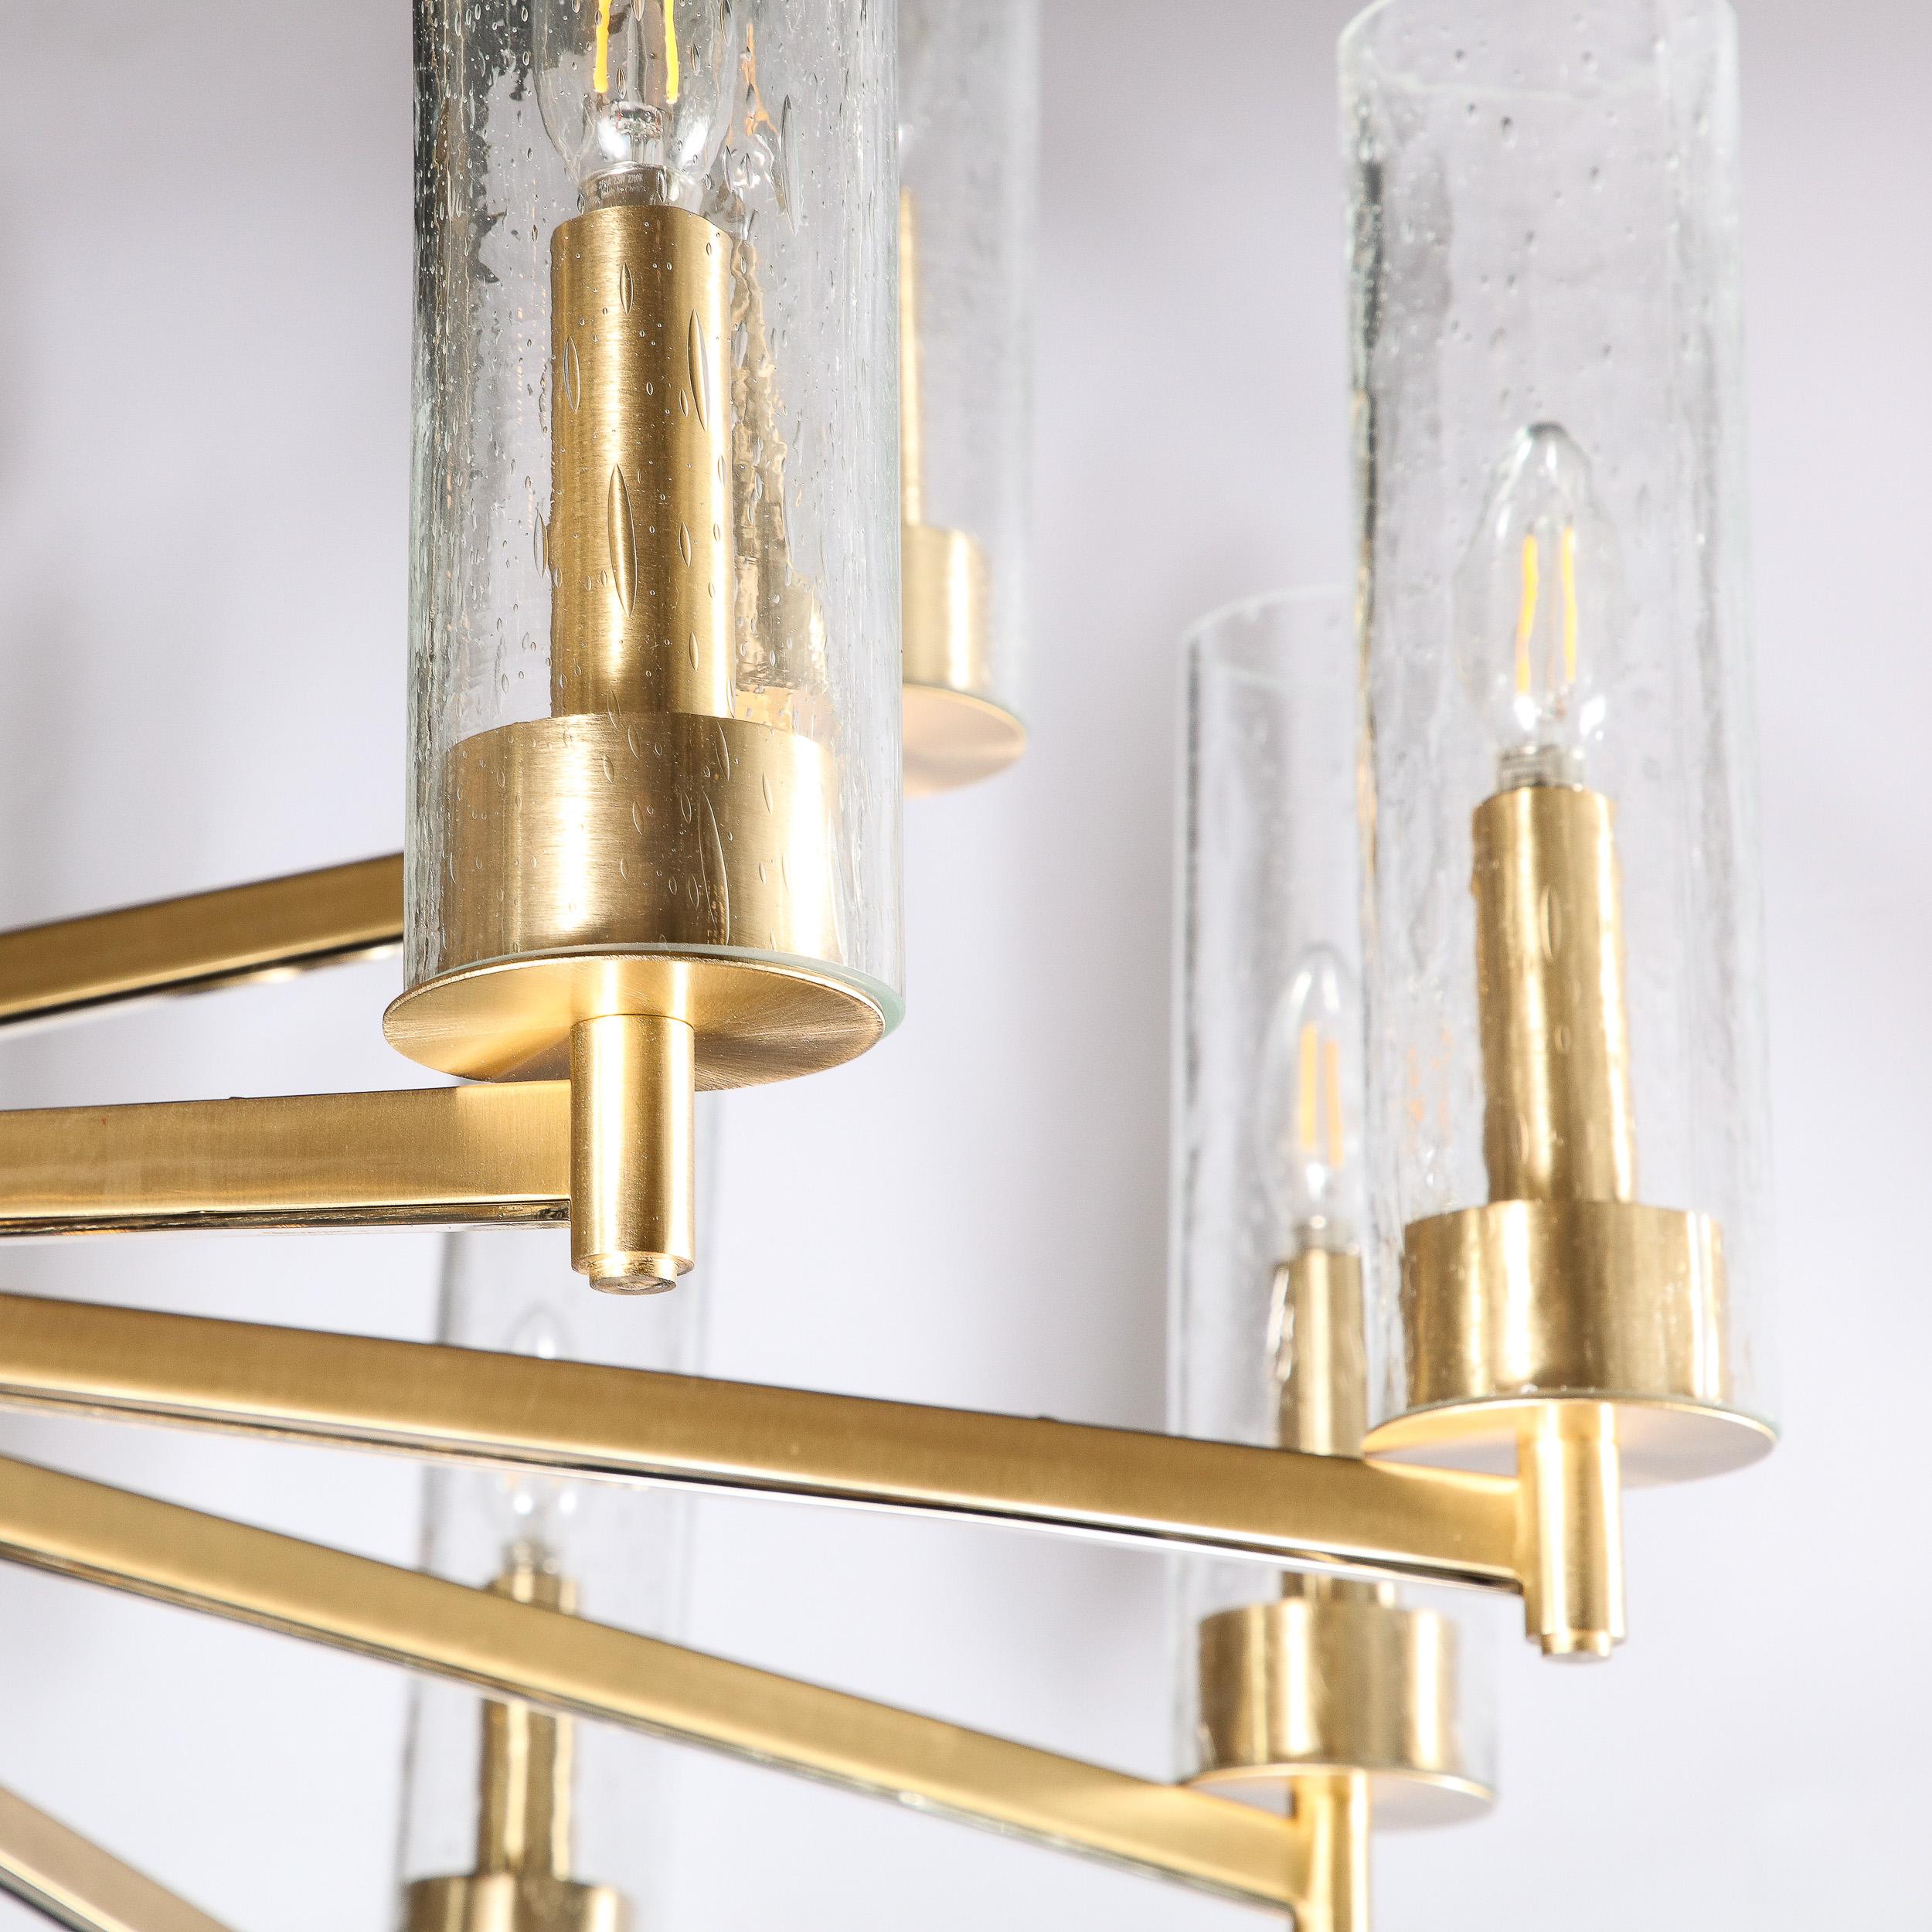 Modernist 15 Arm Chandelier in Brushed Brass & Transparent Cylindrical Shades For Sale 2